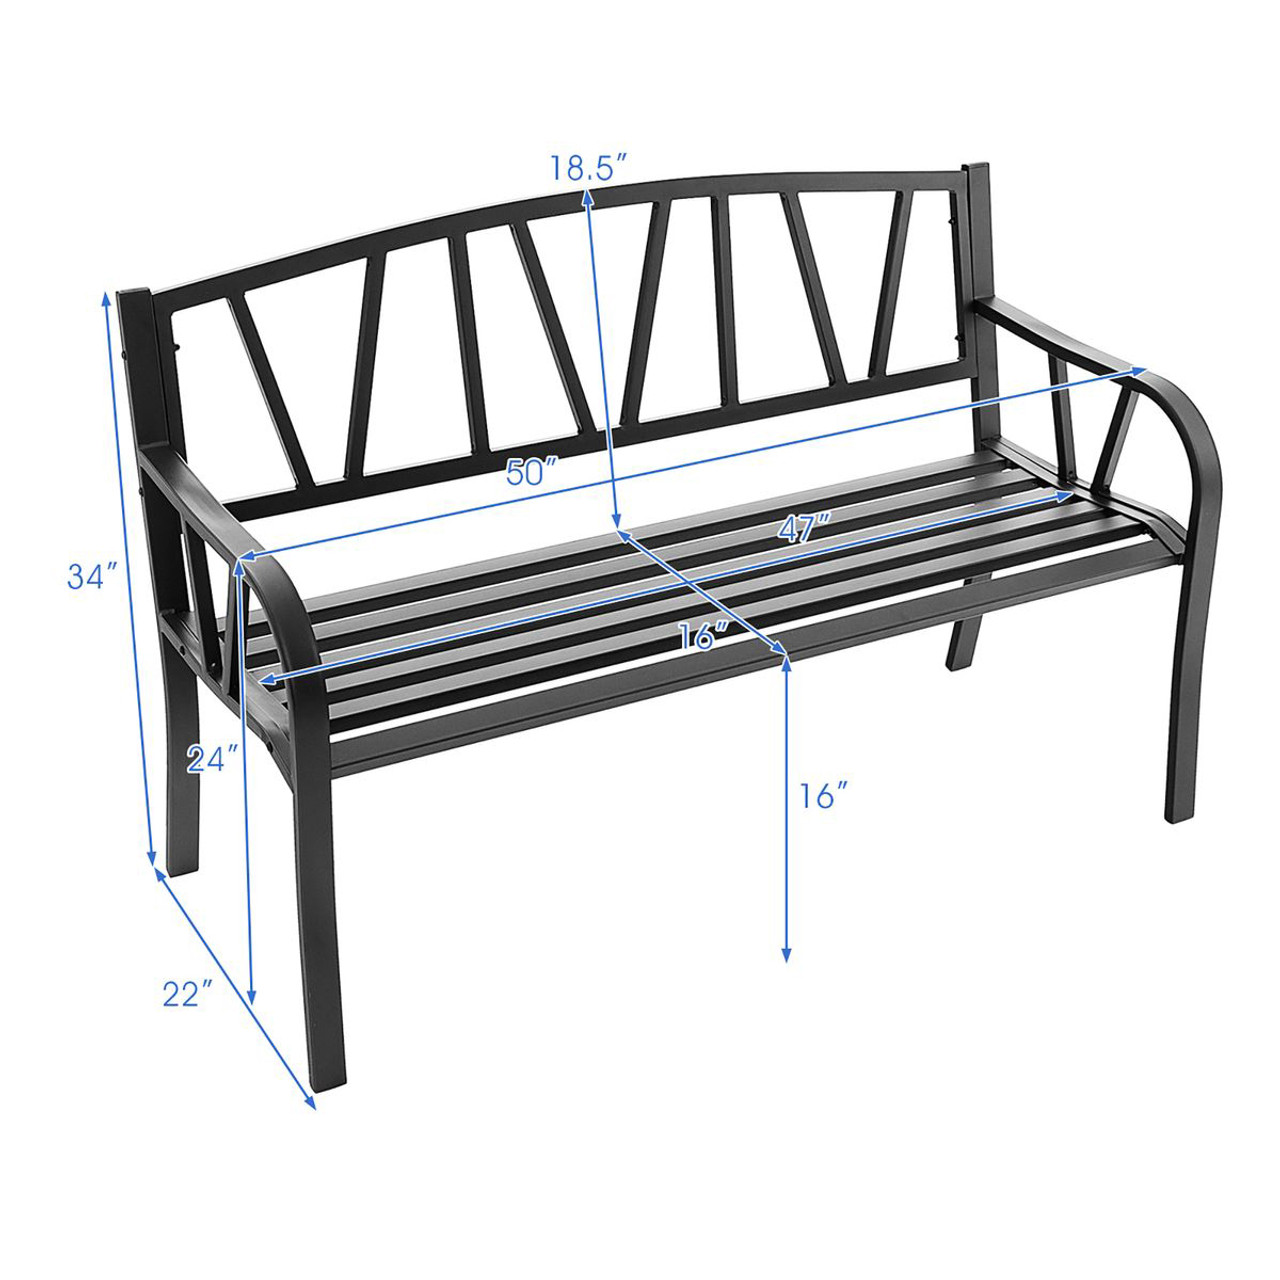 50-Inch Outdoor Patio Garden Bench Metal Frame with Ergonomic Armrest product image